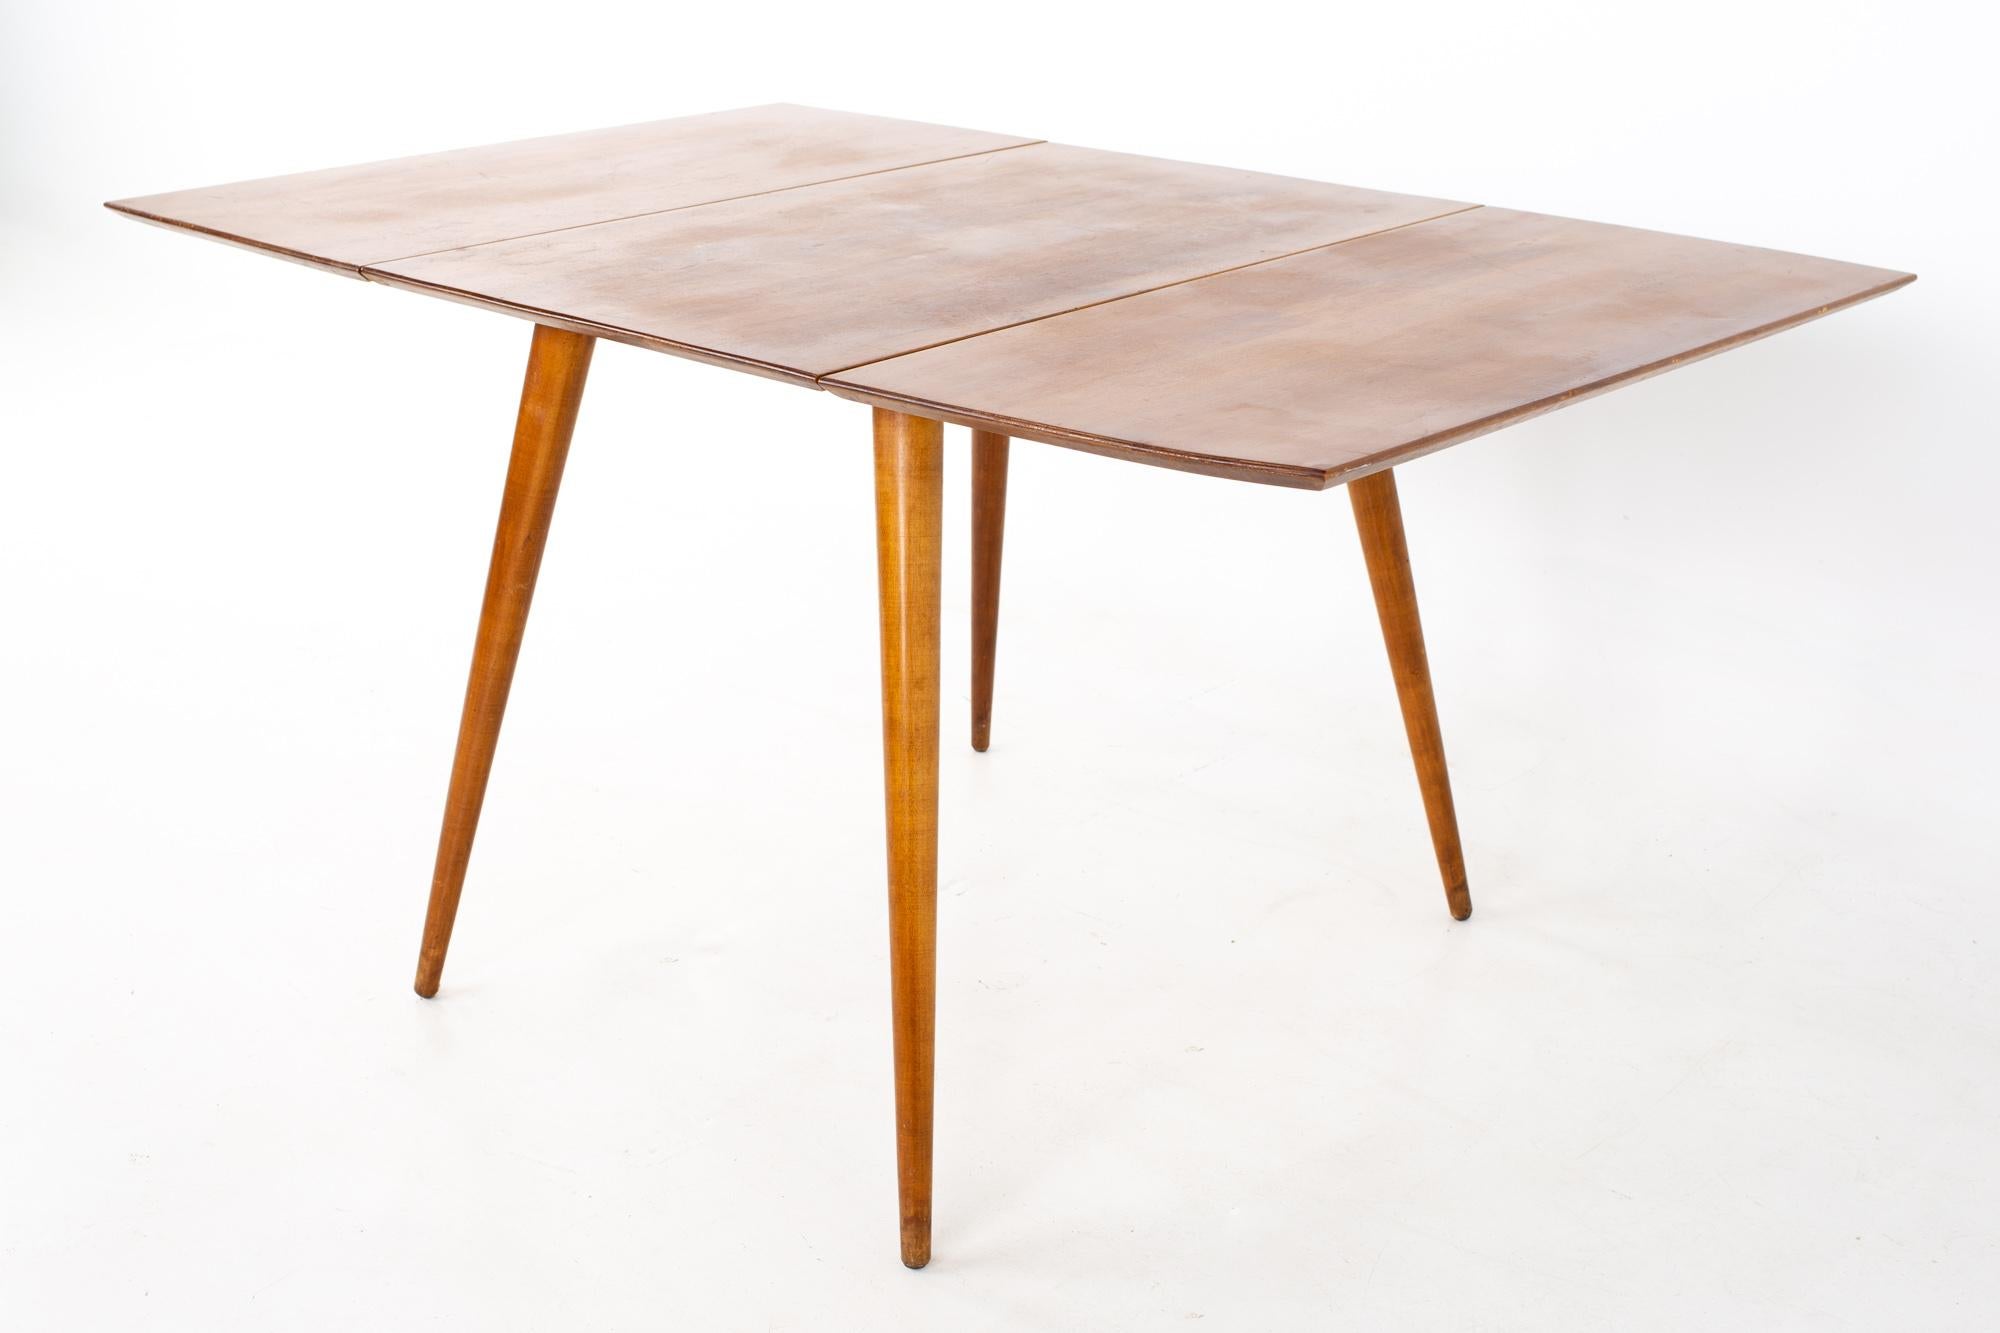 Paul McCobb for Planner Group mid century drop leaf dining table
Table measures: 23.25 wide x 36 deep x 29 inches high; each leaf is 17 inches wide, making a maximum table width of 57.25 when both leaves are used 

All pieces of furniture can be